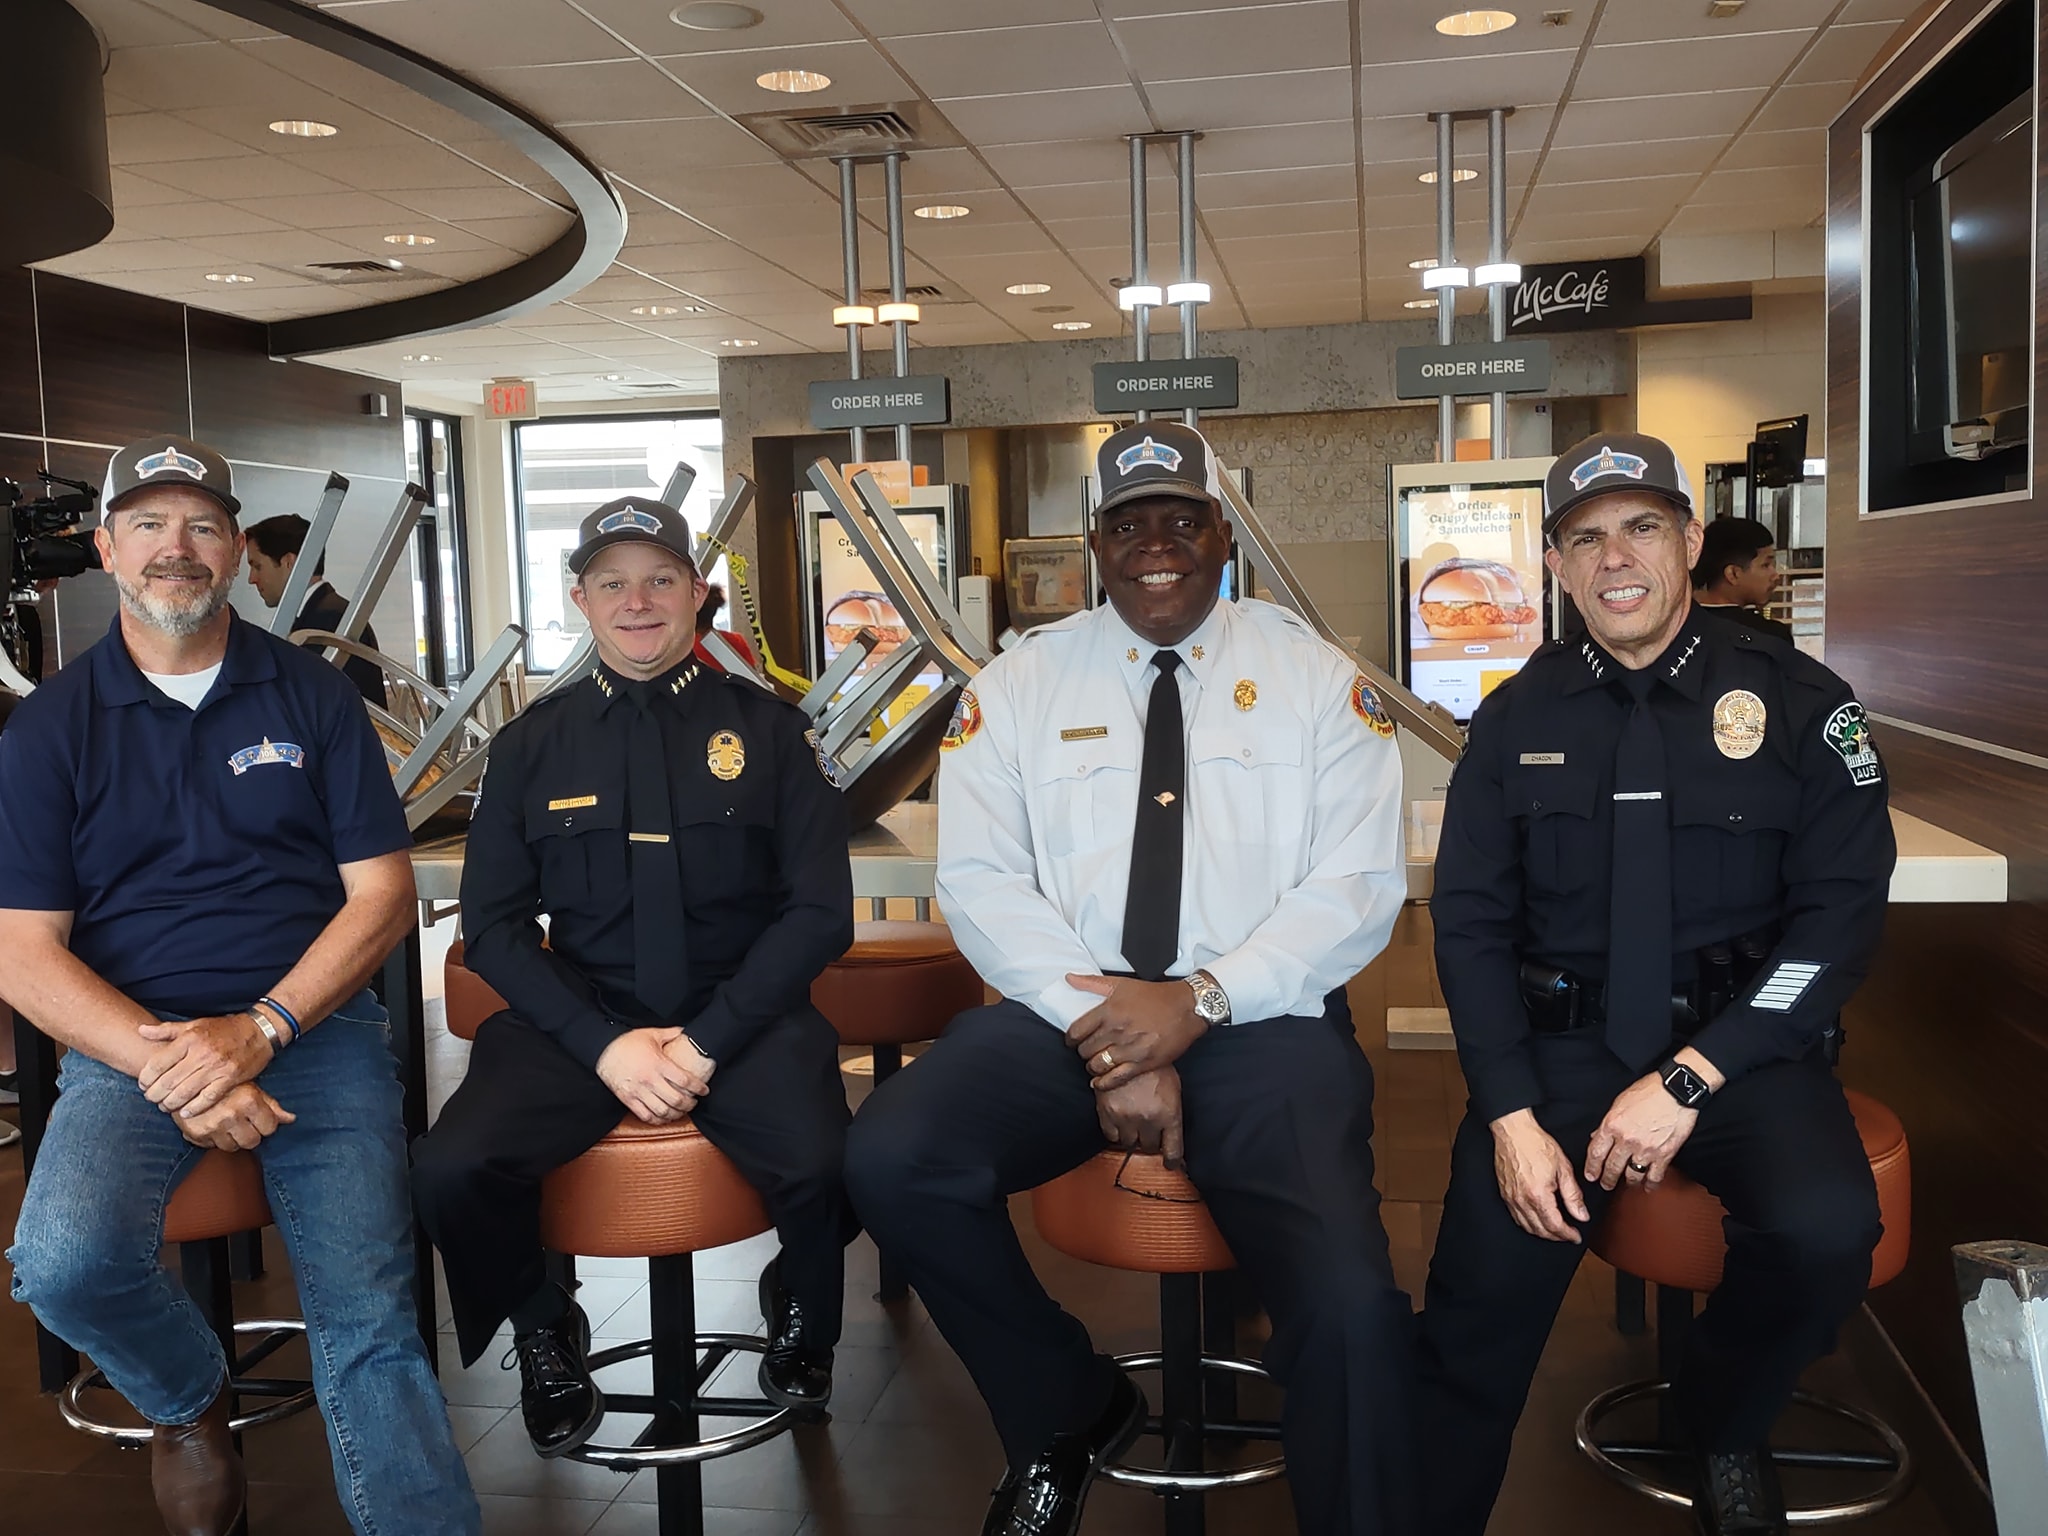 100 Club of Central Texas Executive Director Grahame Jones with Austin EMS, Fire, and Police Chiefs at McDonald's Good Friday Fundraiser